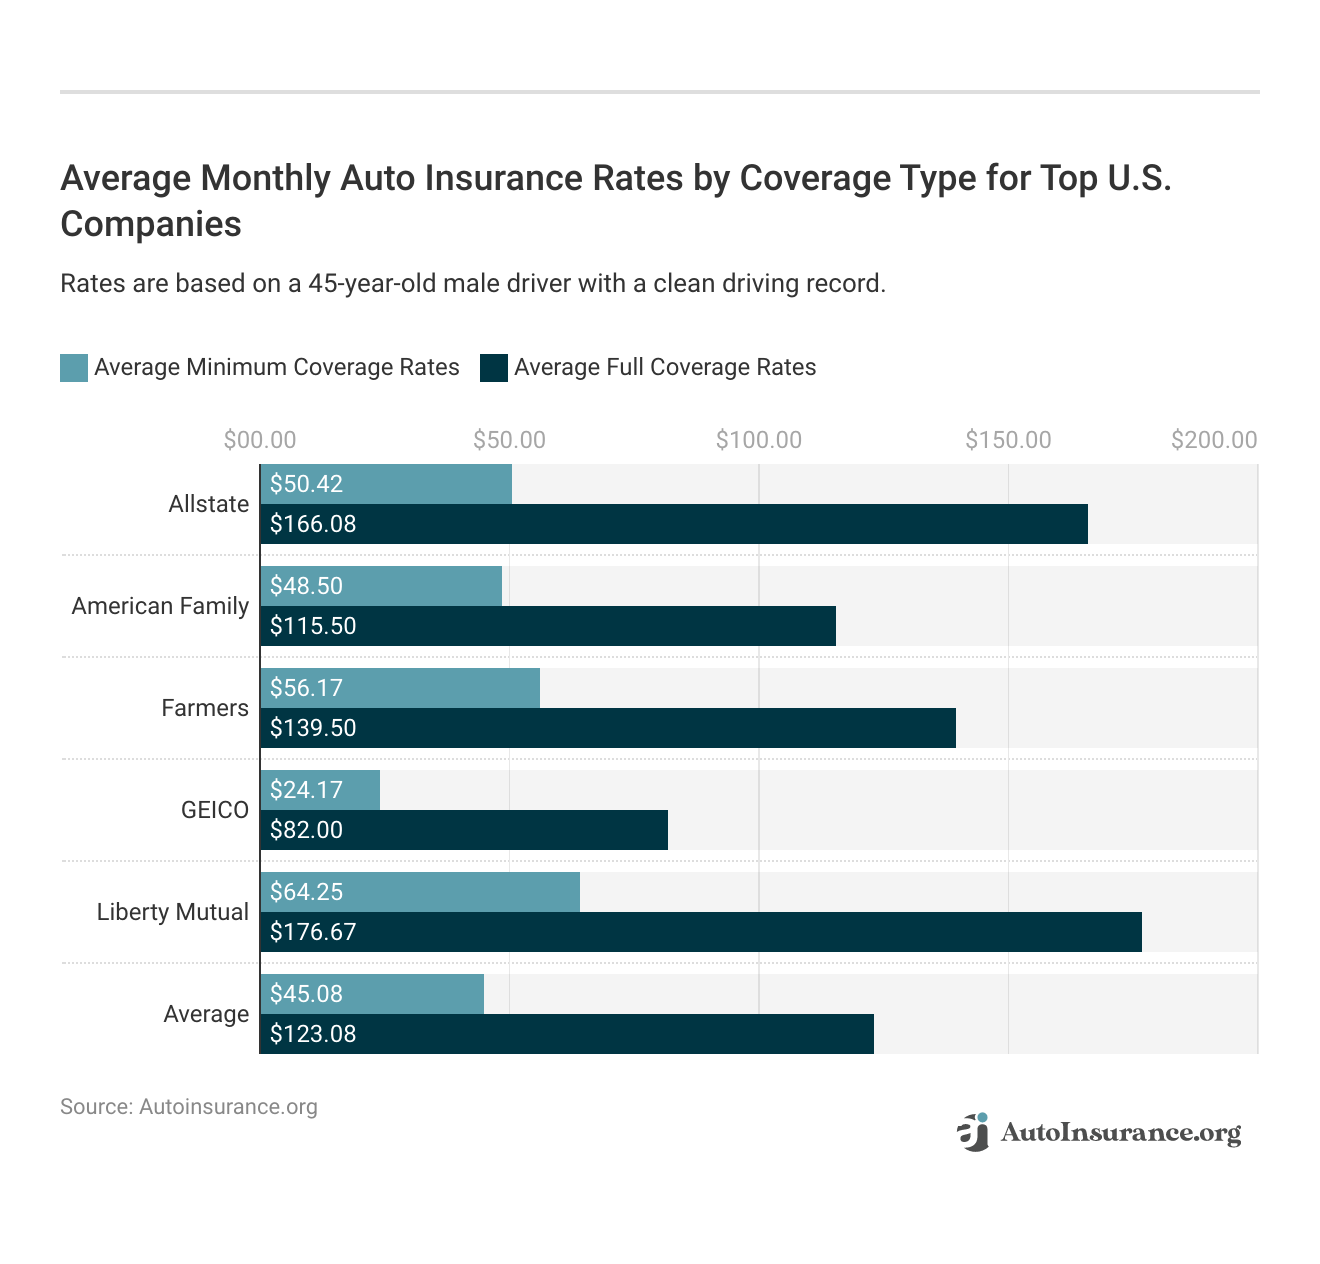 <h3>Average Monthly Auto Insurance Rates by Coverage Type for Top U.S. Companies</h3>